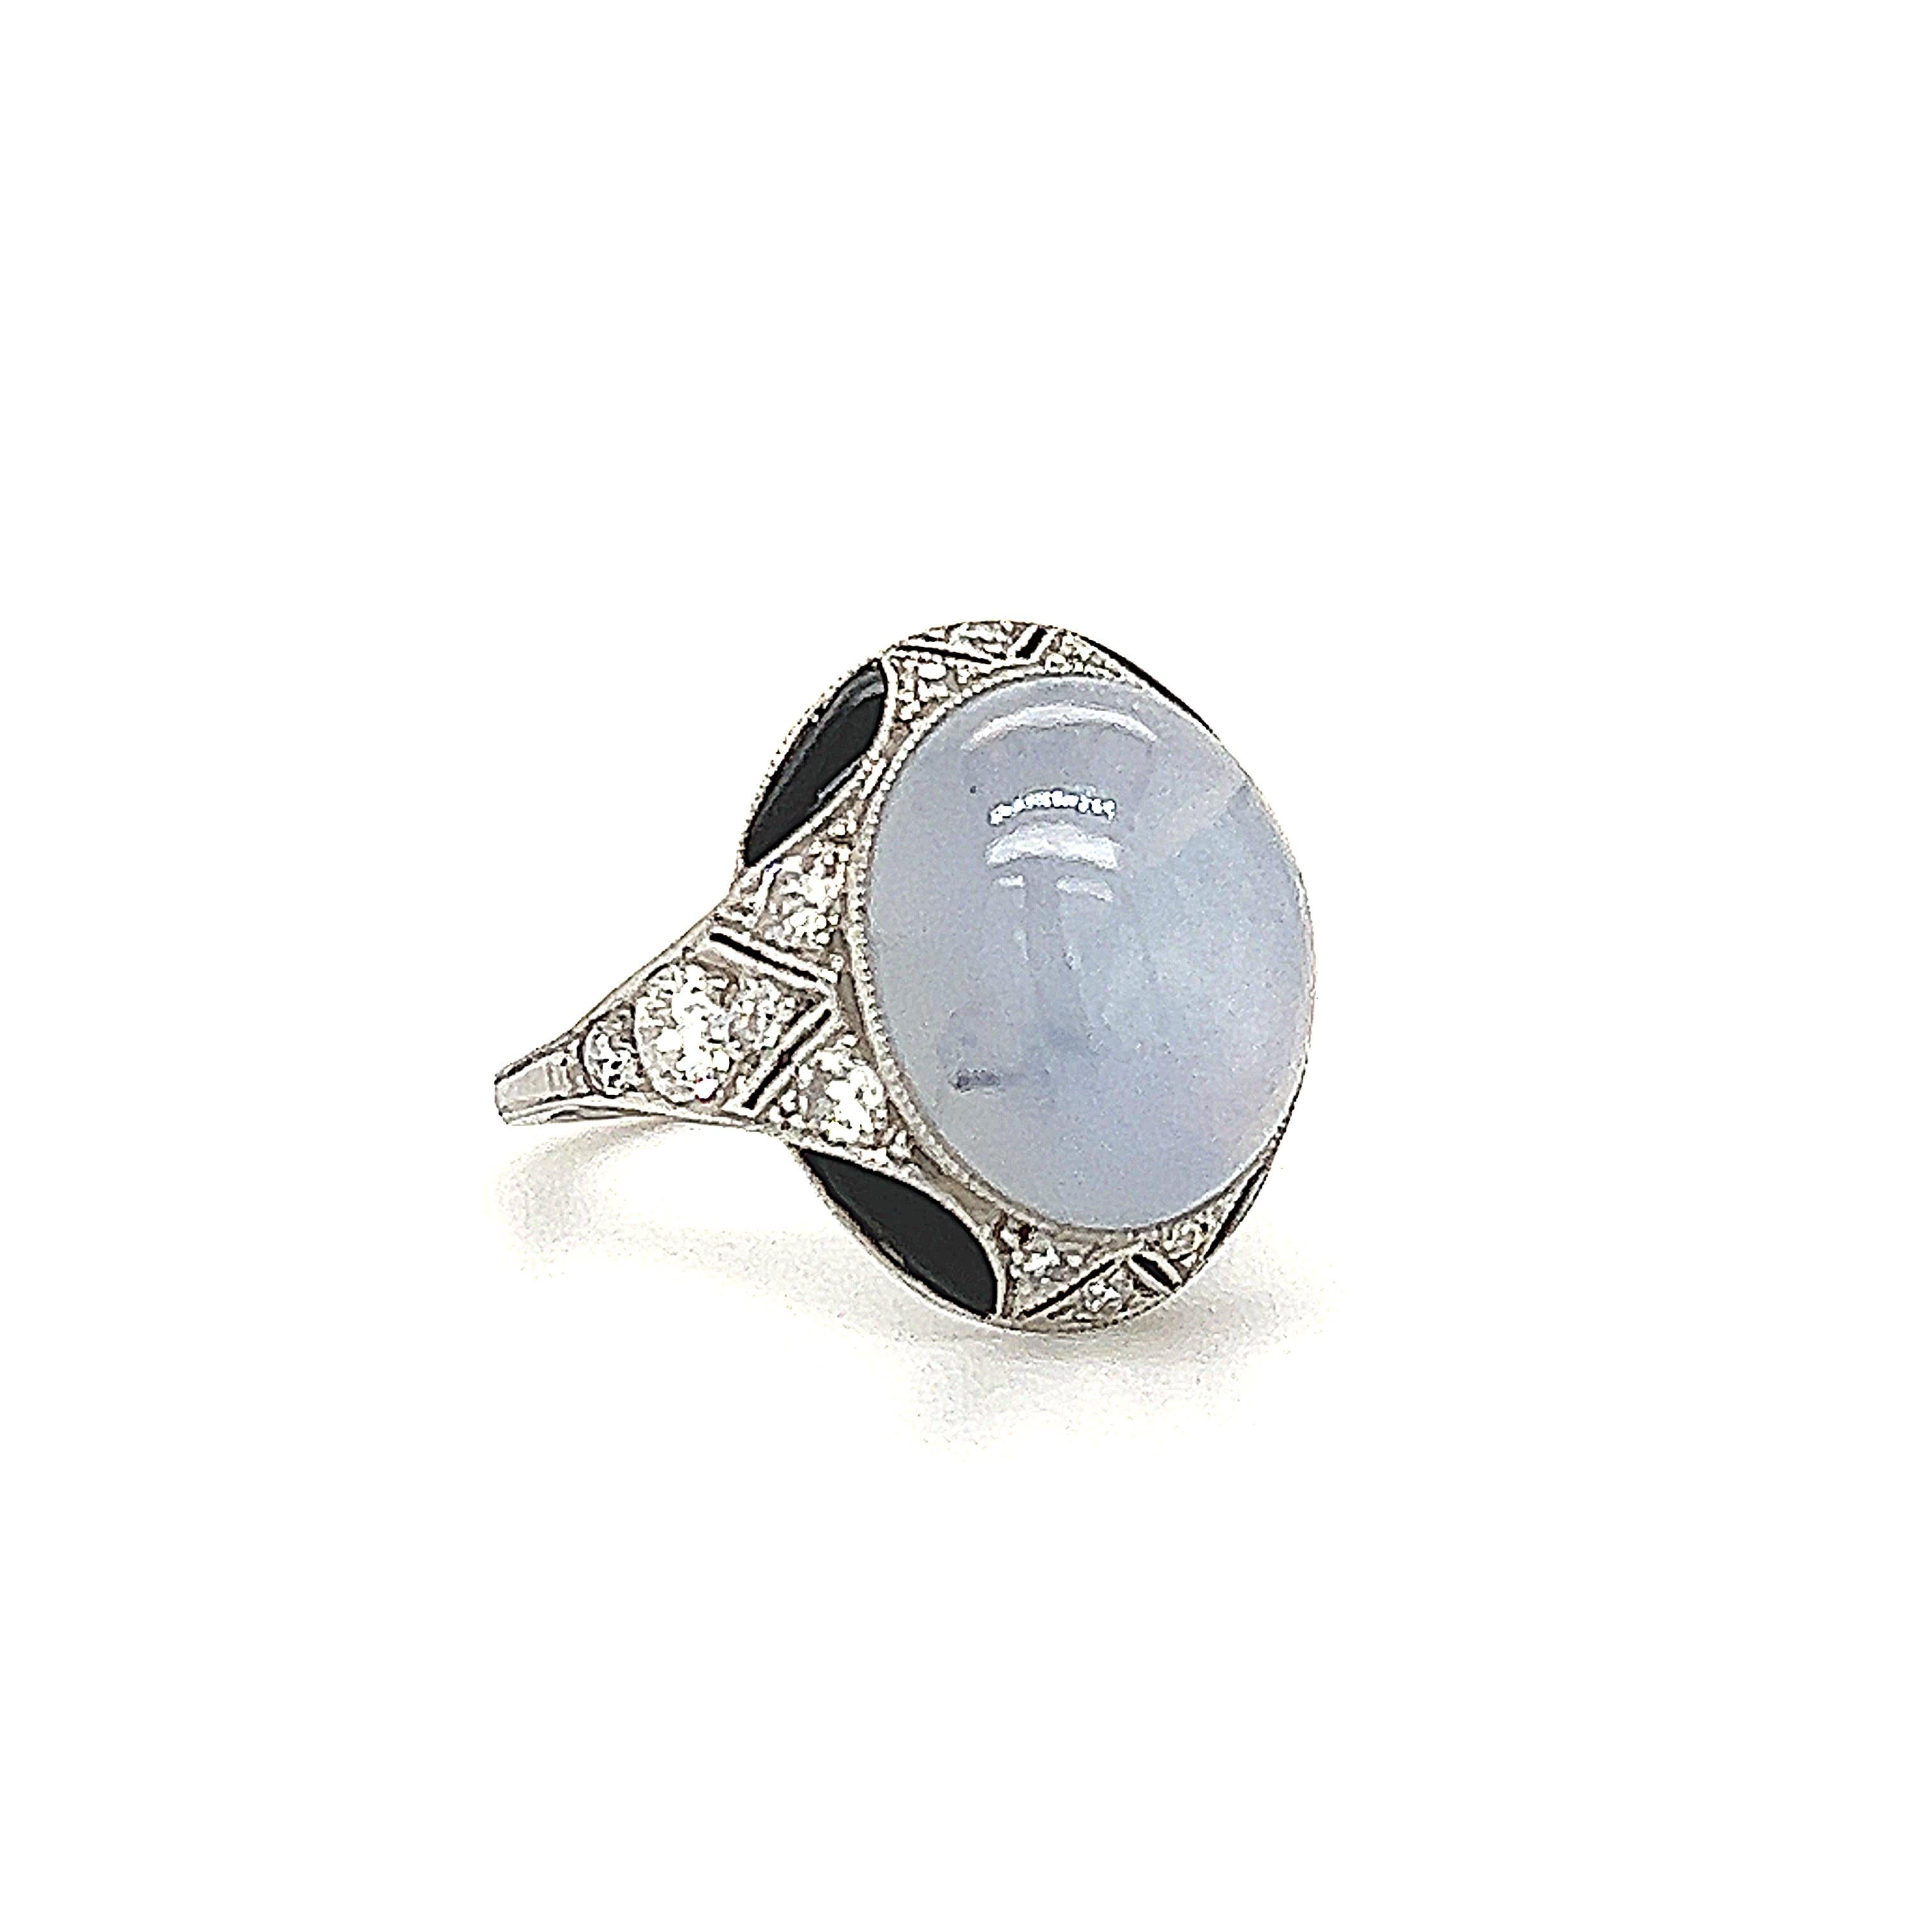 A breathtaking design from Van Cleef & Arpels. This stunning art deco ring is crafted in platinum with details throughout. The highlight of the design is a cabochon cut star sapphire that shows a dreamy shade of blue. The star sapphire shows